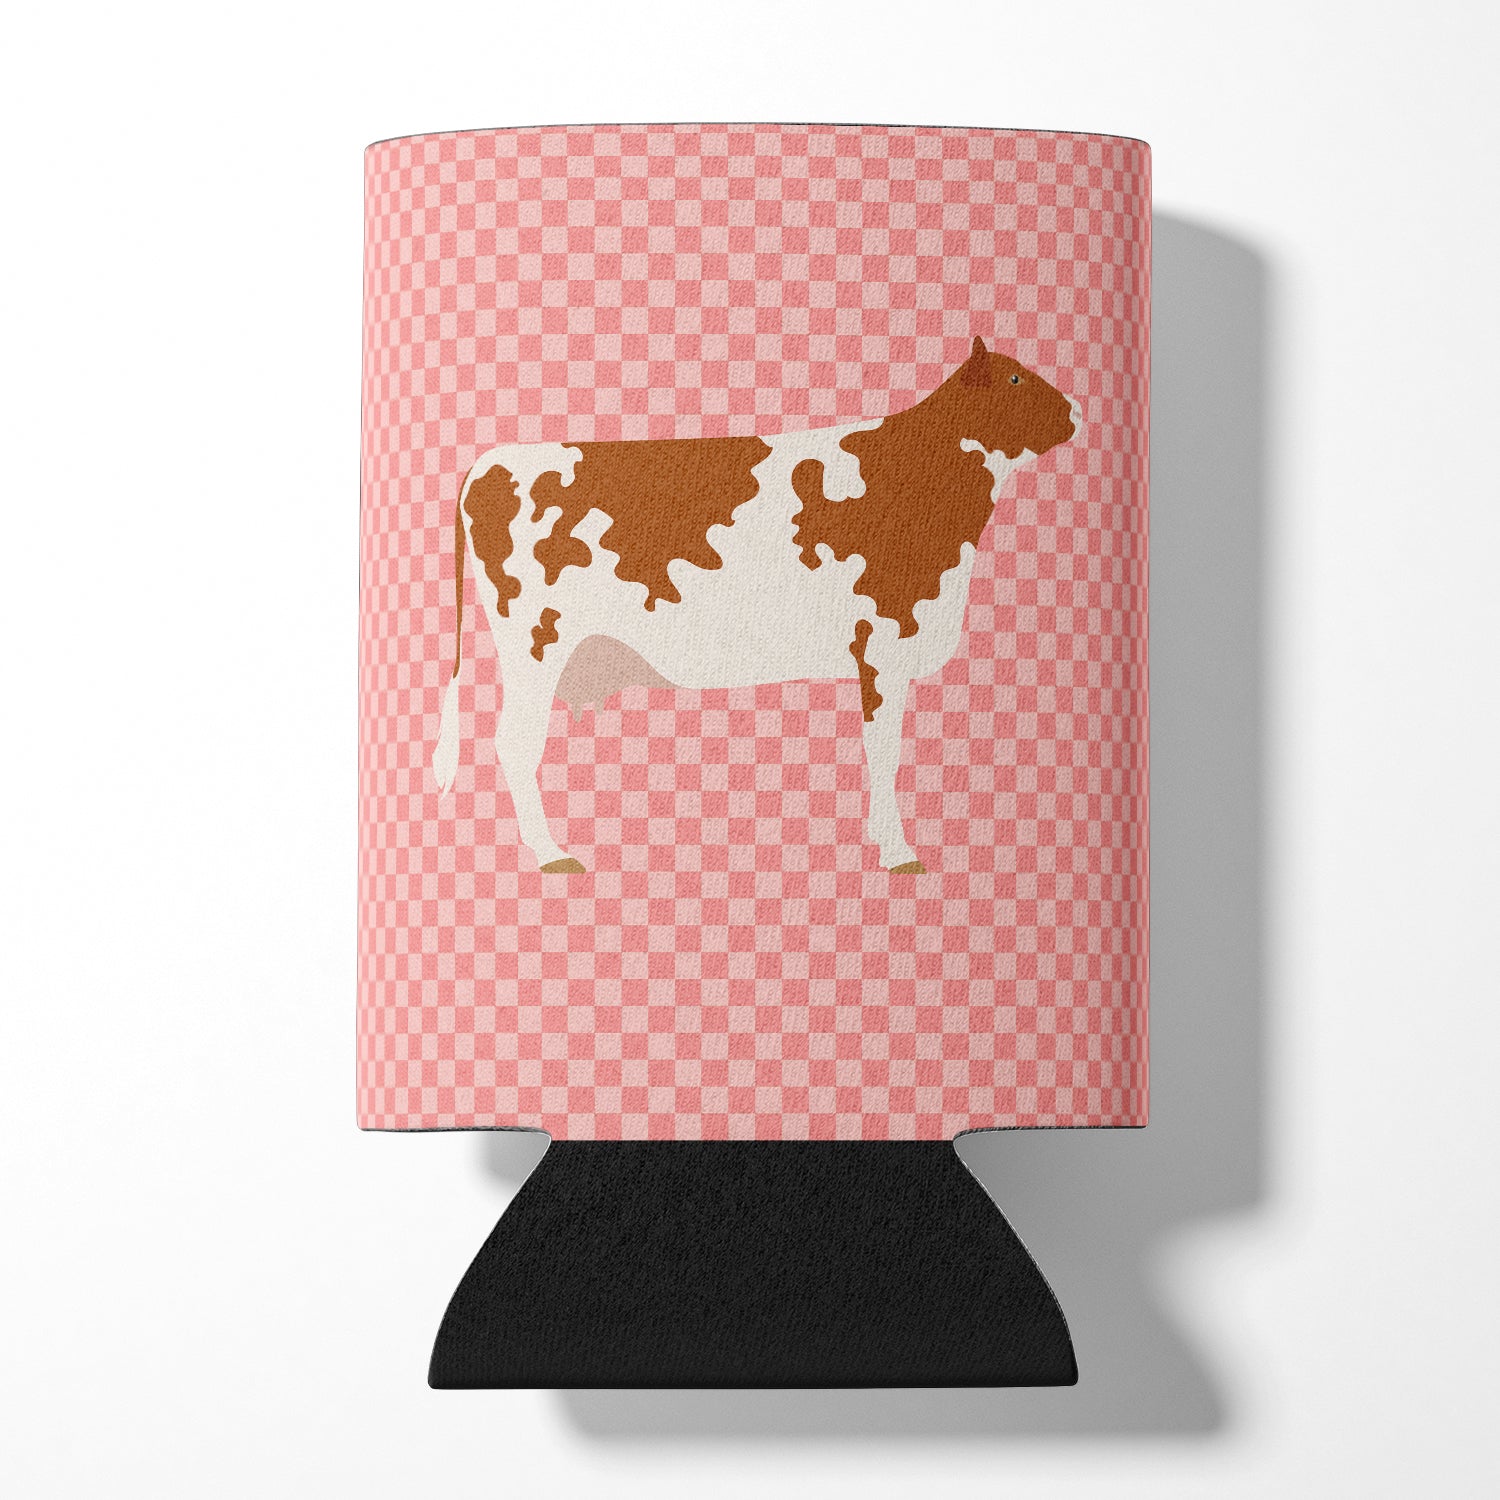 Ayrshire Cow Pink Check Can or Bottle Hugger BB7827CC